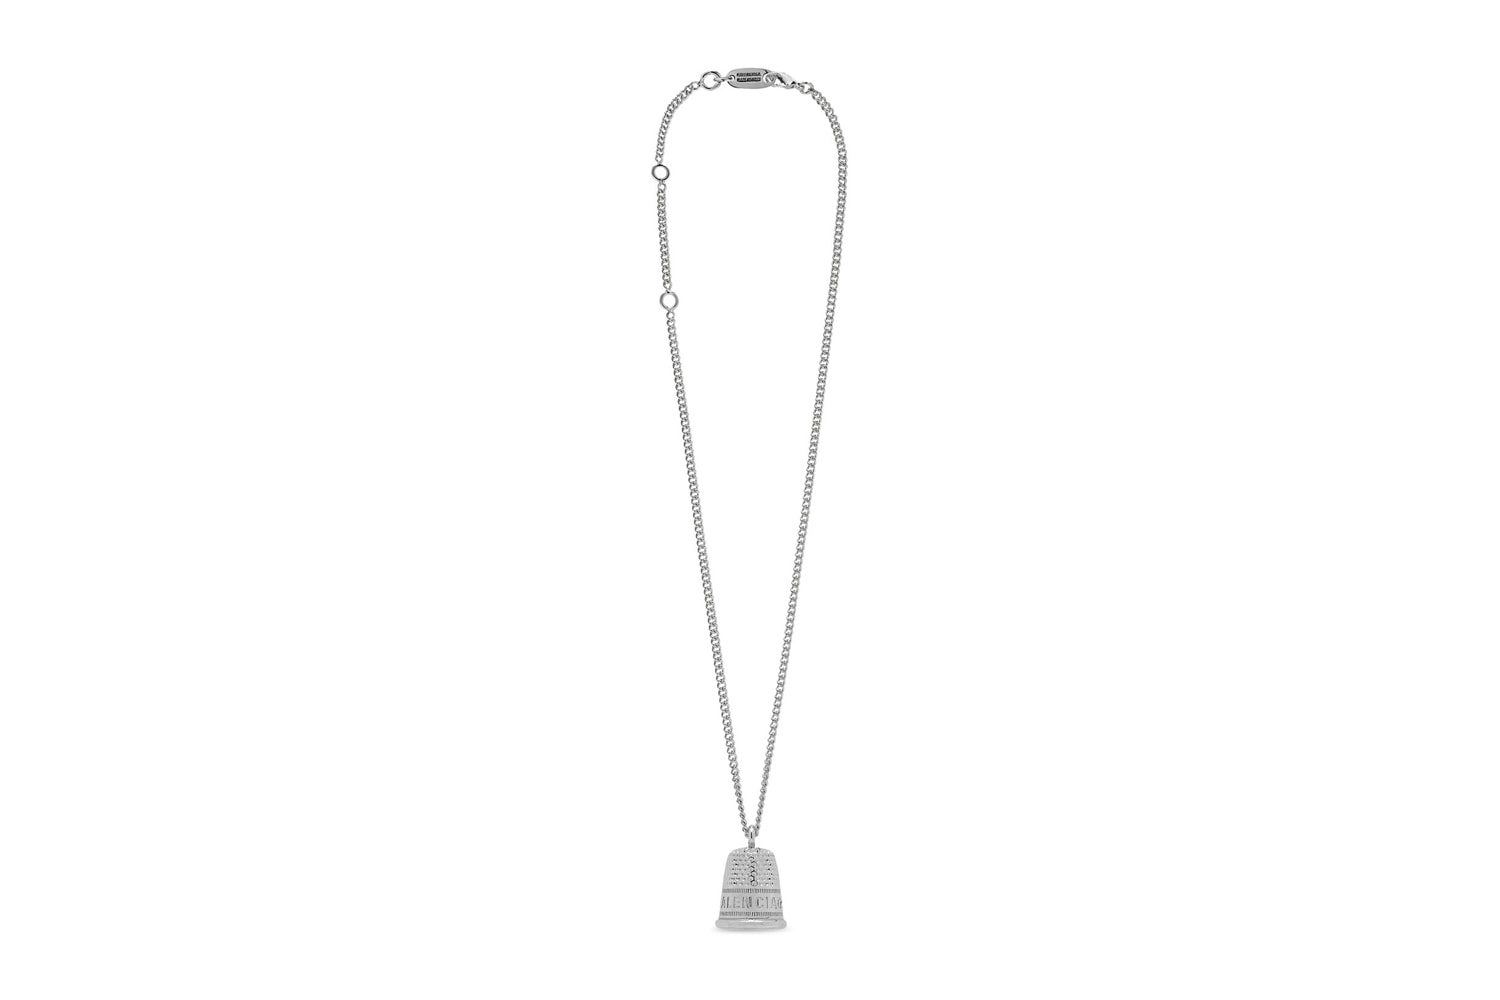 Balenciaga Thimble Necklace Ring Earrings Release Info Date Buy Price 